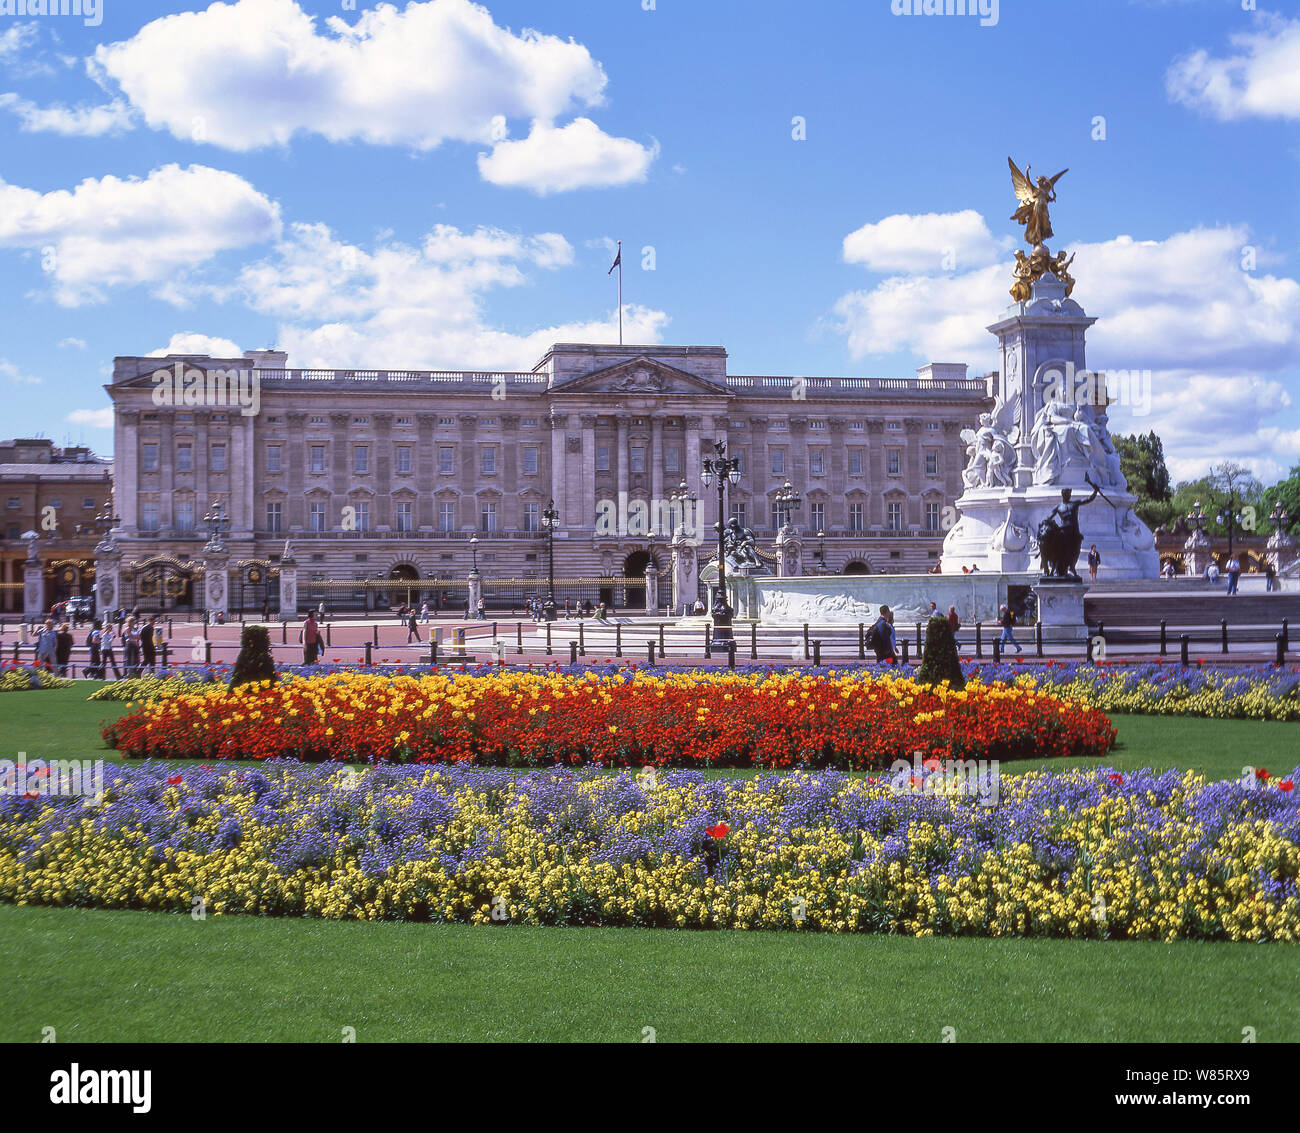 Buckingham Palace and Victoria Memorial, The Mall, City of Westminster, Greater London, England, United Kingdom Stock Photo